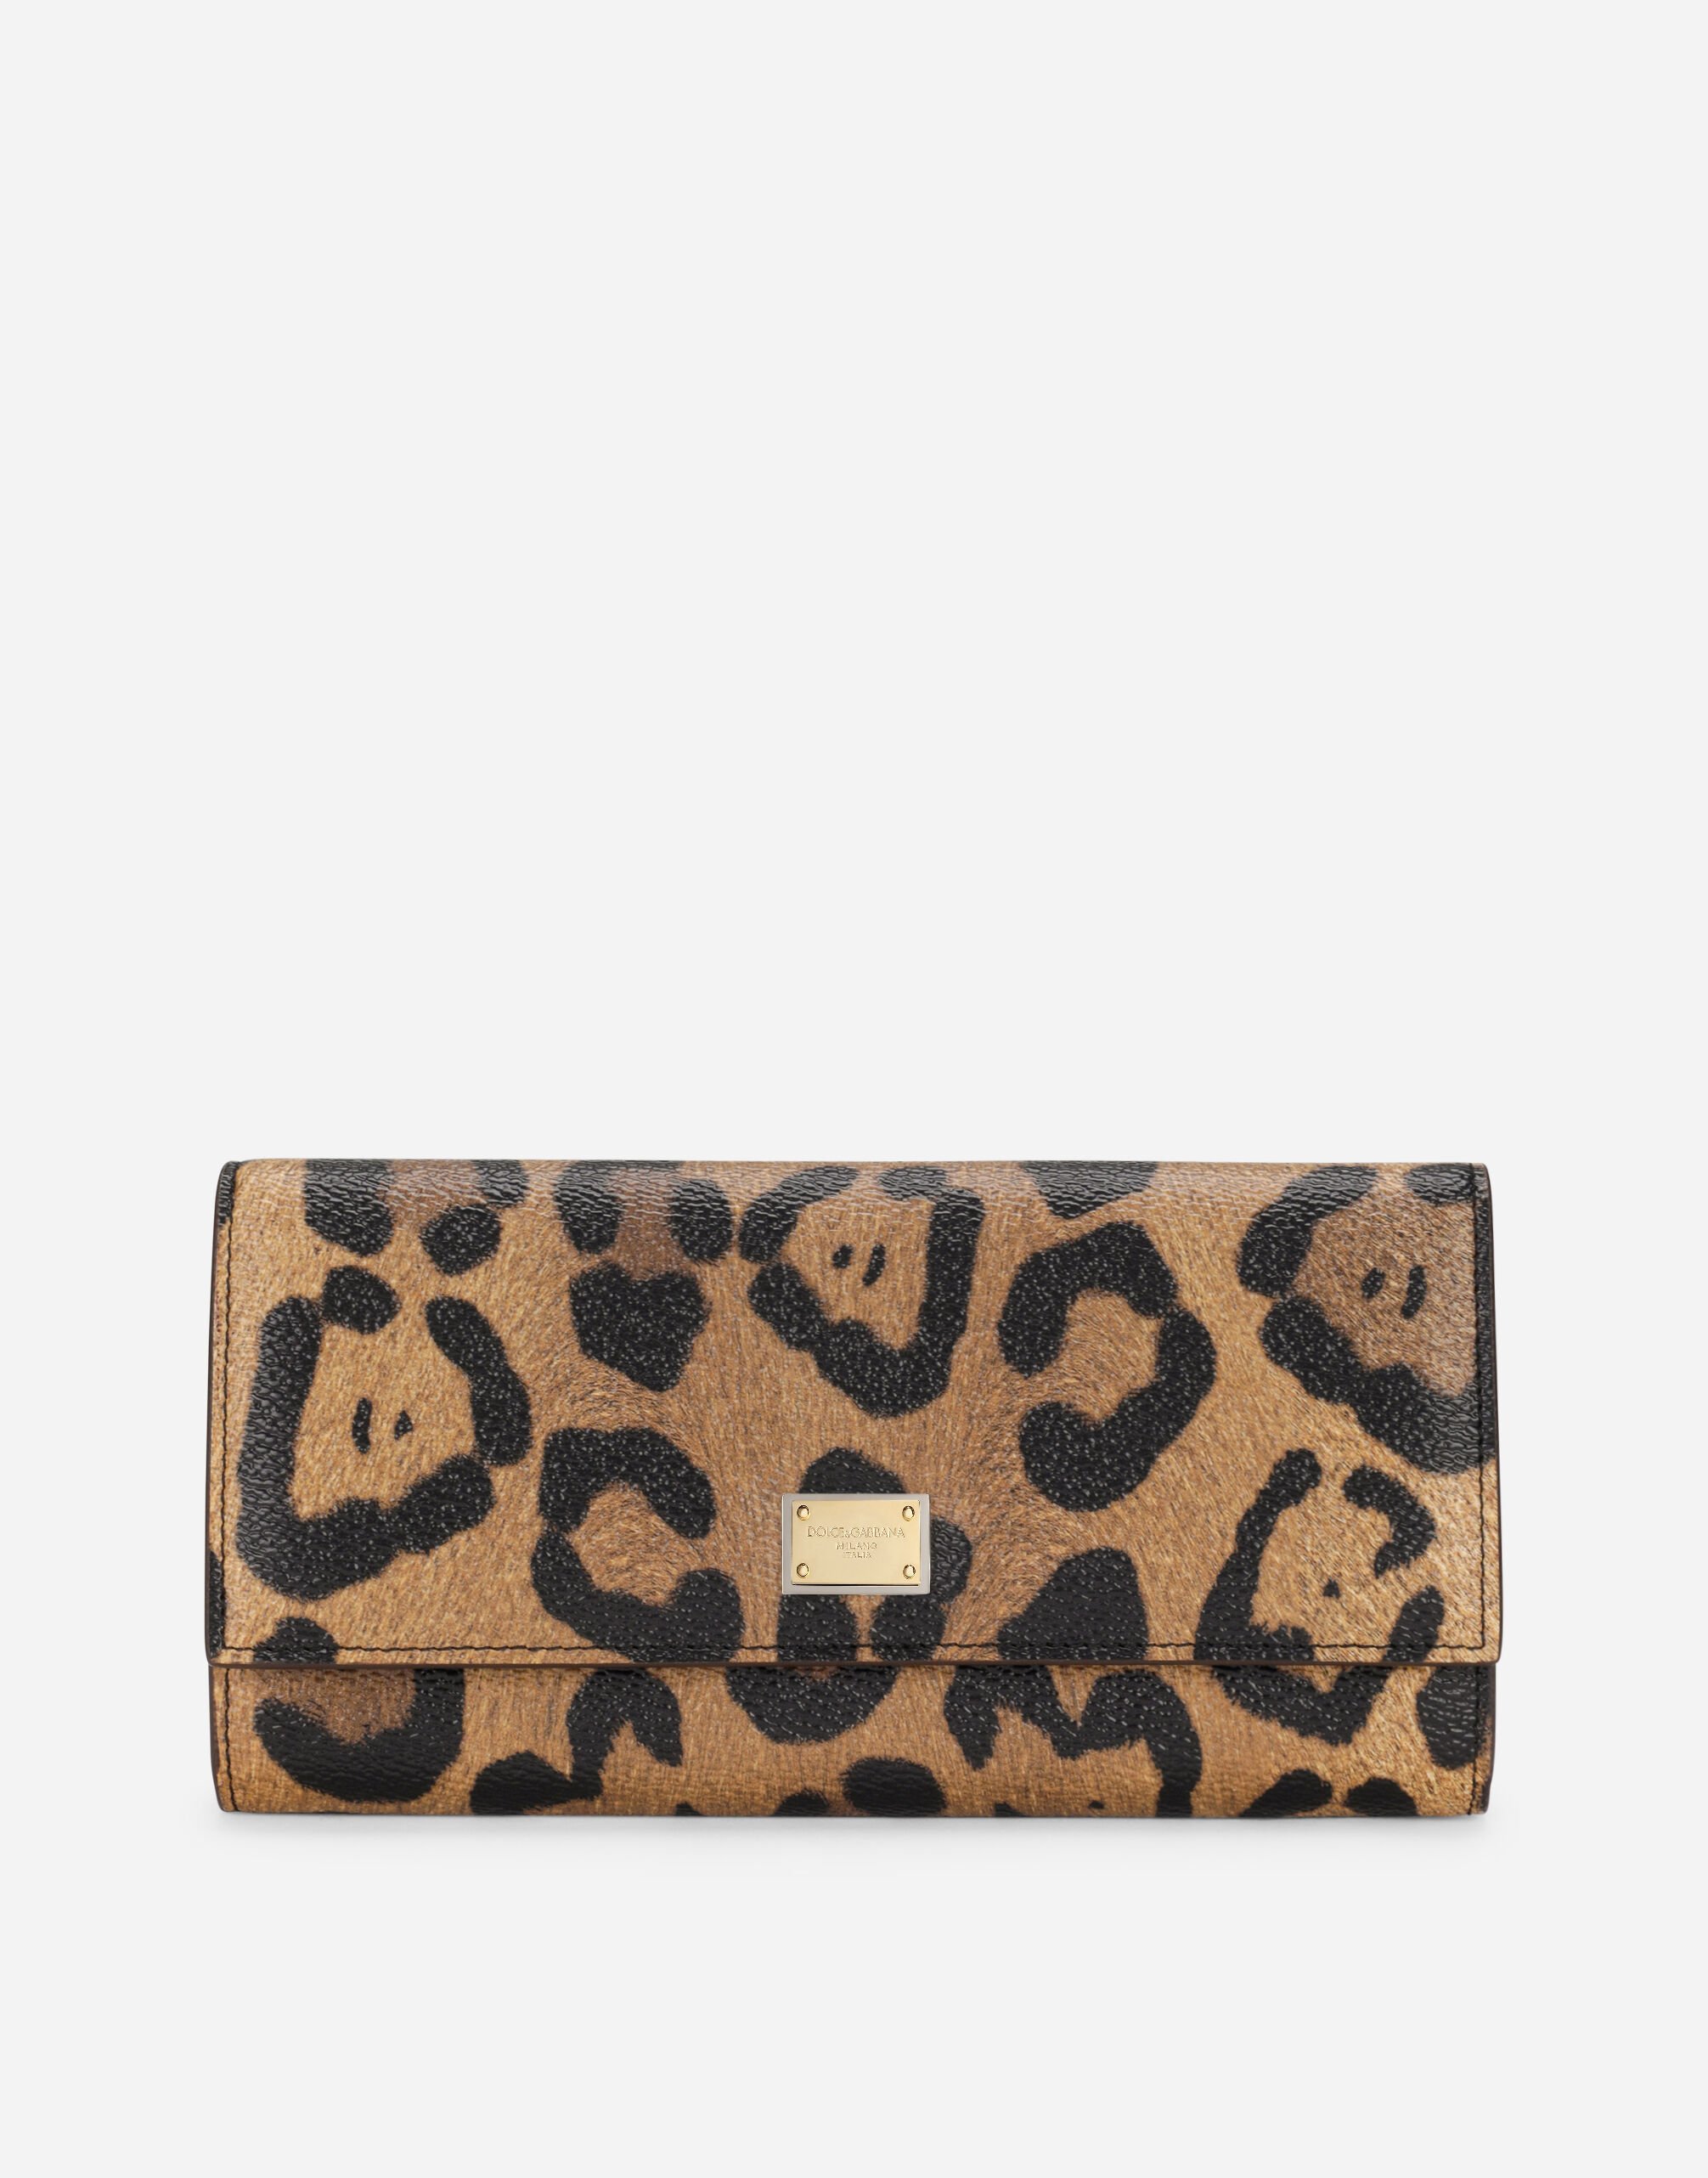 Dolce & Gabbana Leopard-print Crespo continental wallet with branded plate Multicolor BB6933AW384